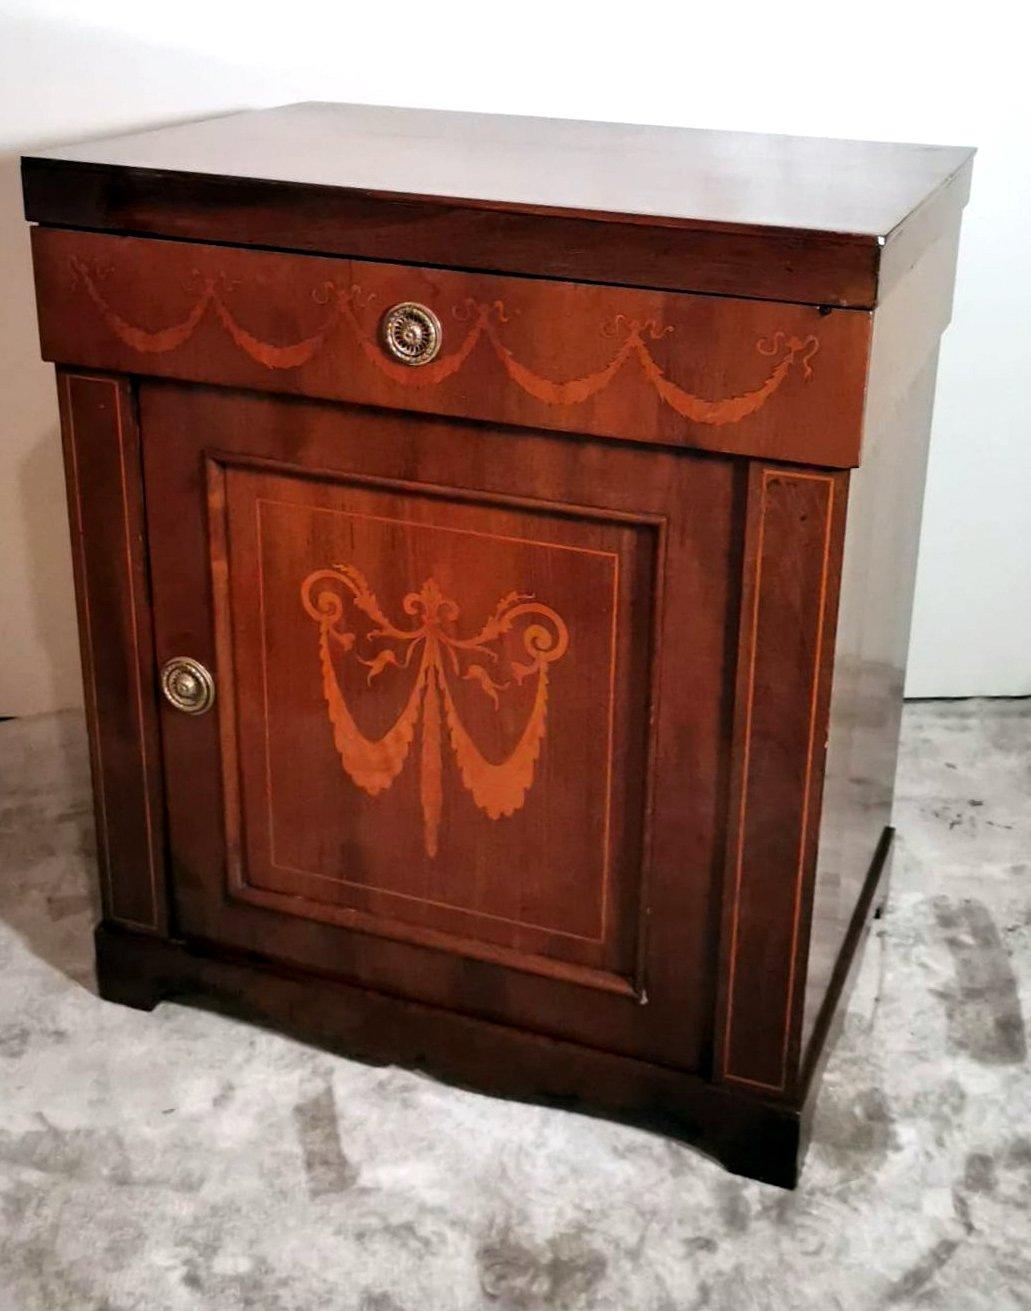 Biedermeier Style Small Italian Sideboard In Good Condition For Sale In Prato, Tuscany